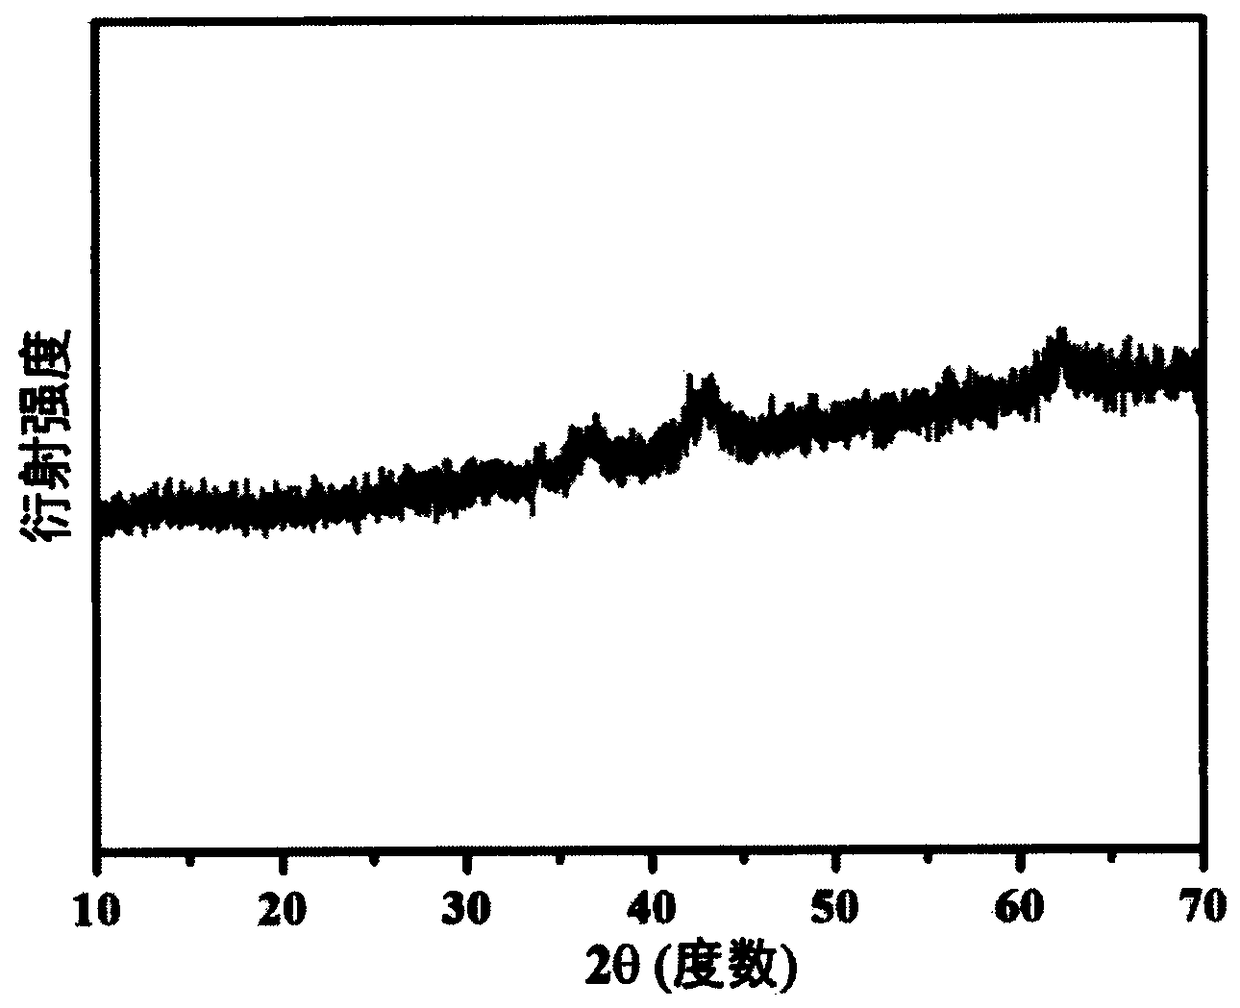 Hollow manganese-doped cobalt nickel oxide coated nitrogen-doped carbon nanocomposites and preparation method thereof